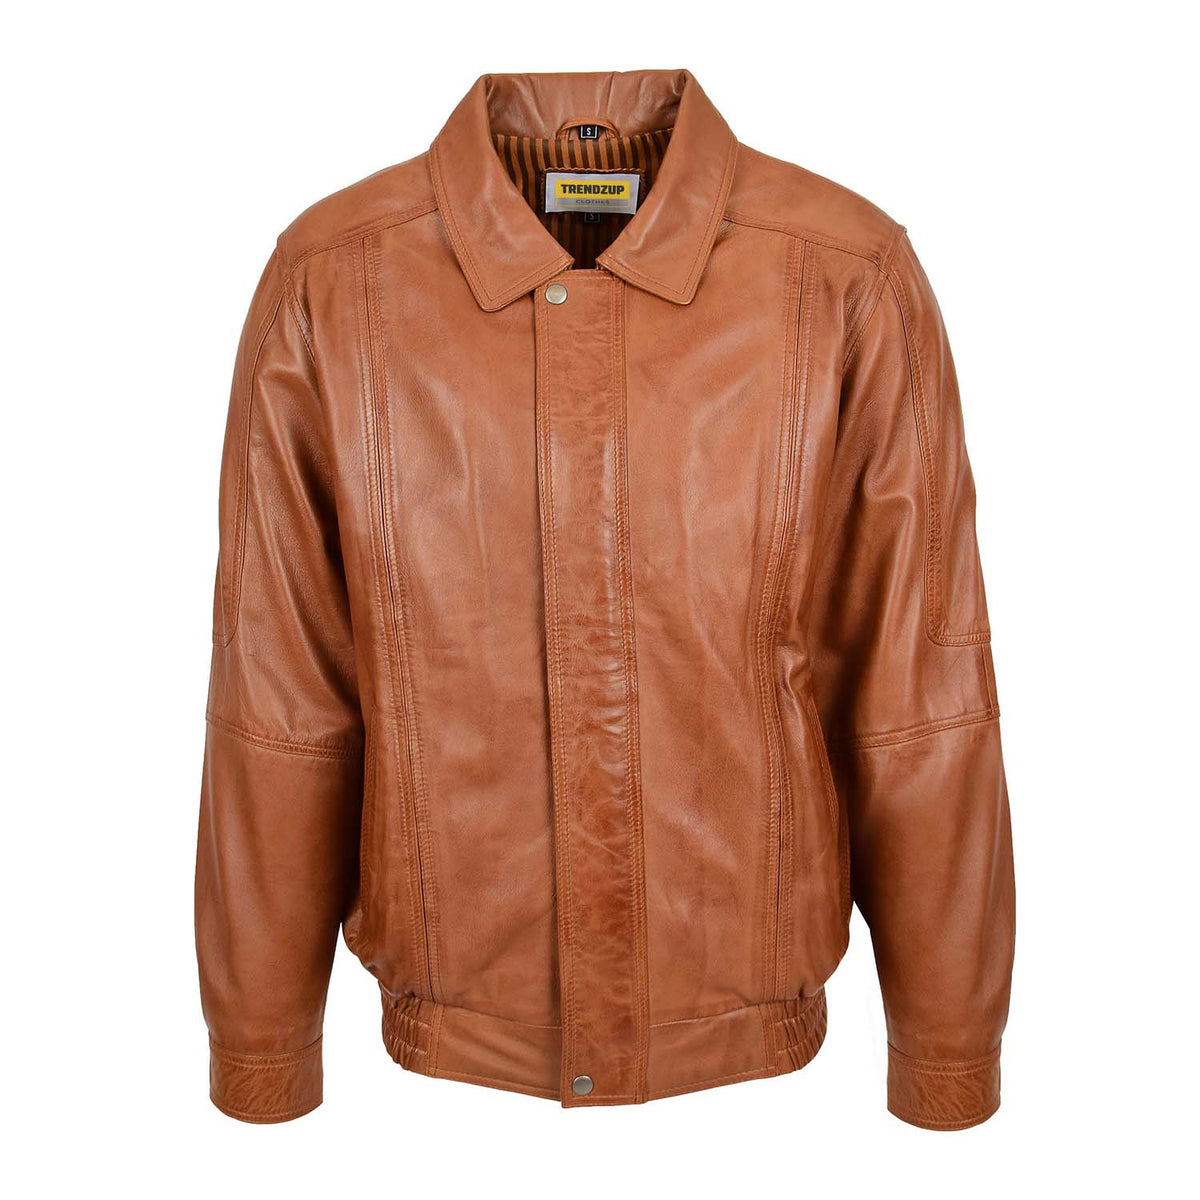 Mens Bomber Leather Jacket Classic Style Jim Tan